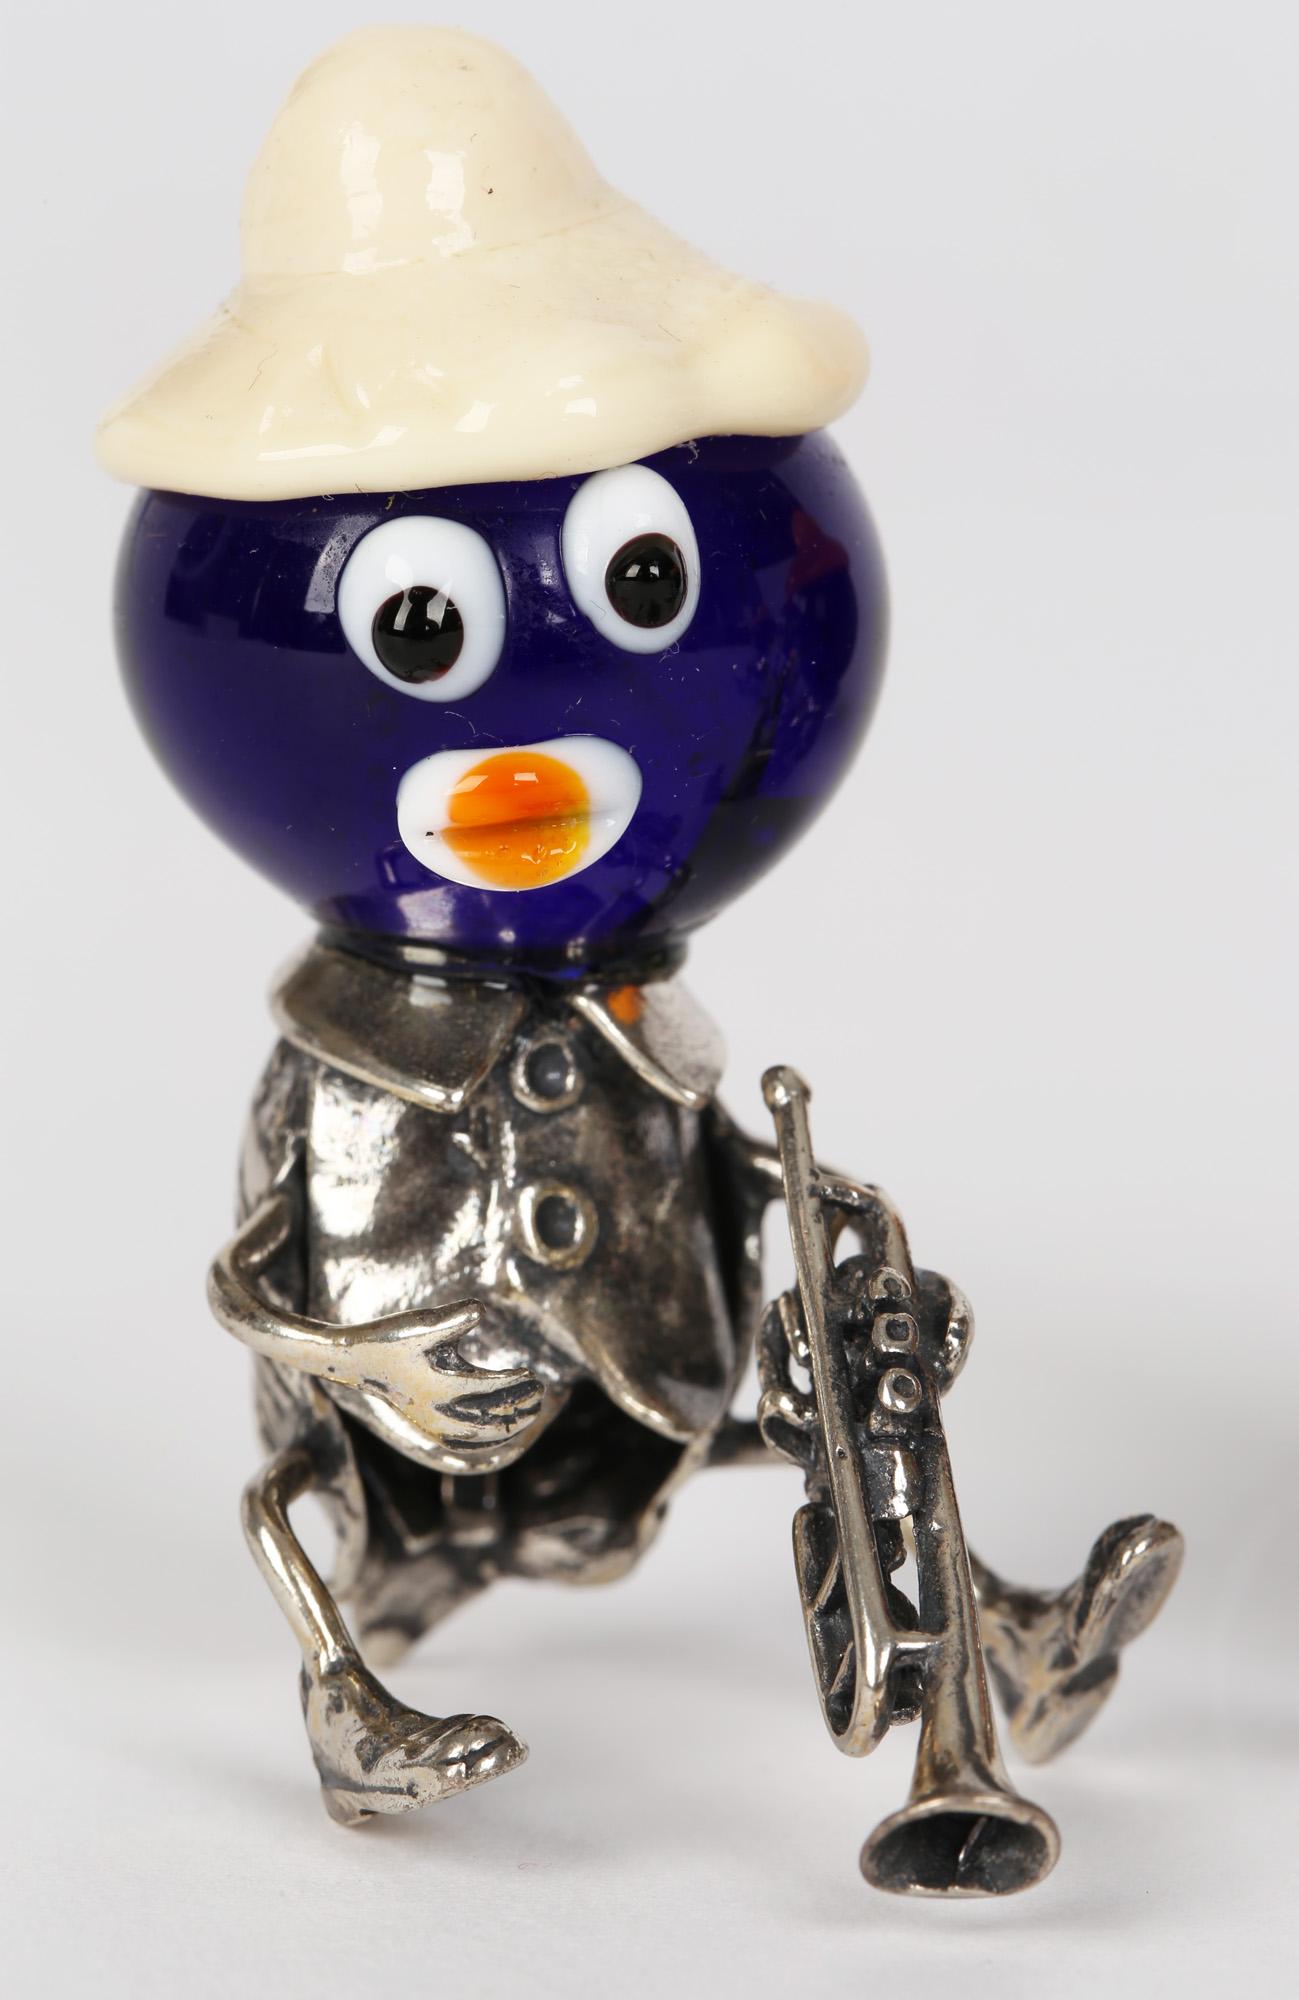 A delightful Italian novelty murano glass mounted silver band figures comprising of two banjo players and two trumpet players dating from the 20th century. The figures are modeled sitting and wearing jackets with tails and collars. The bodies are